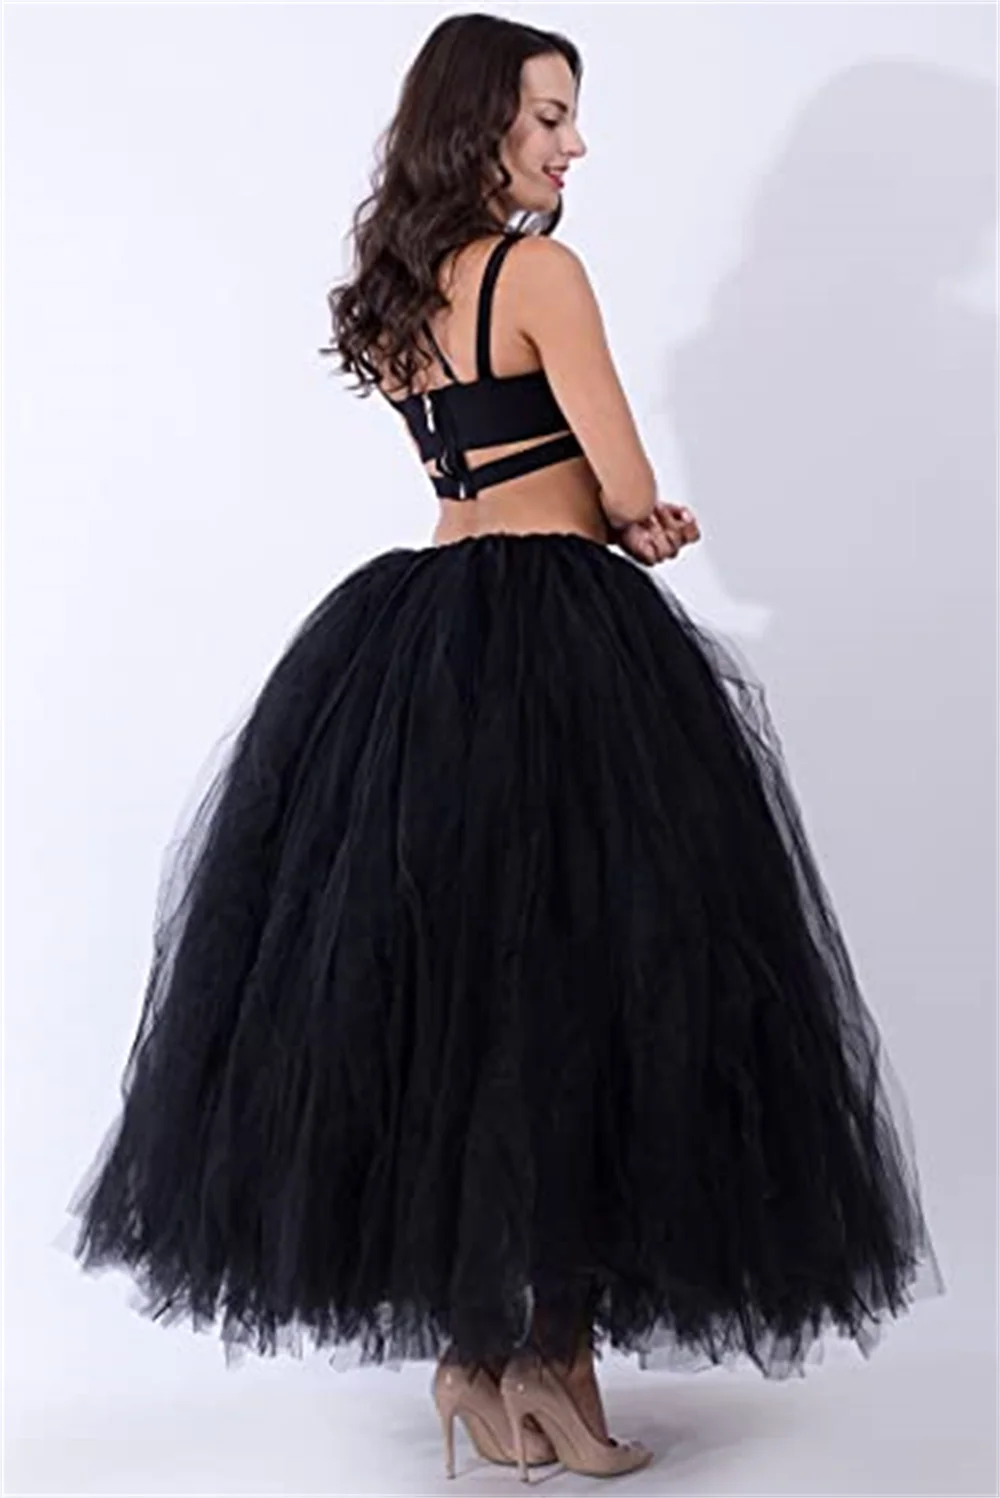 Stock 6 Layers 100cm Maxi Long Tulle Skirt with Ribbon Sashes Princess Fairy Tutu Skirts Womens Vintage Puffy Petticoat Dress CPA833 CPA1009